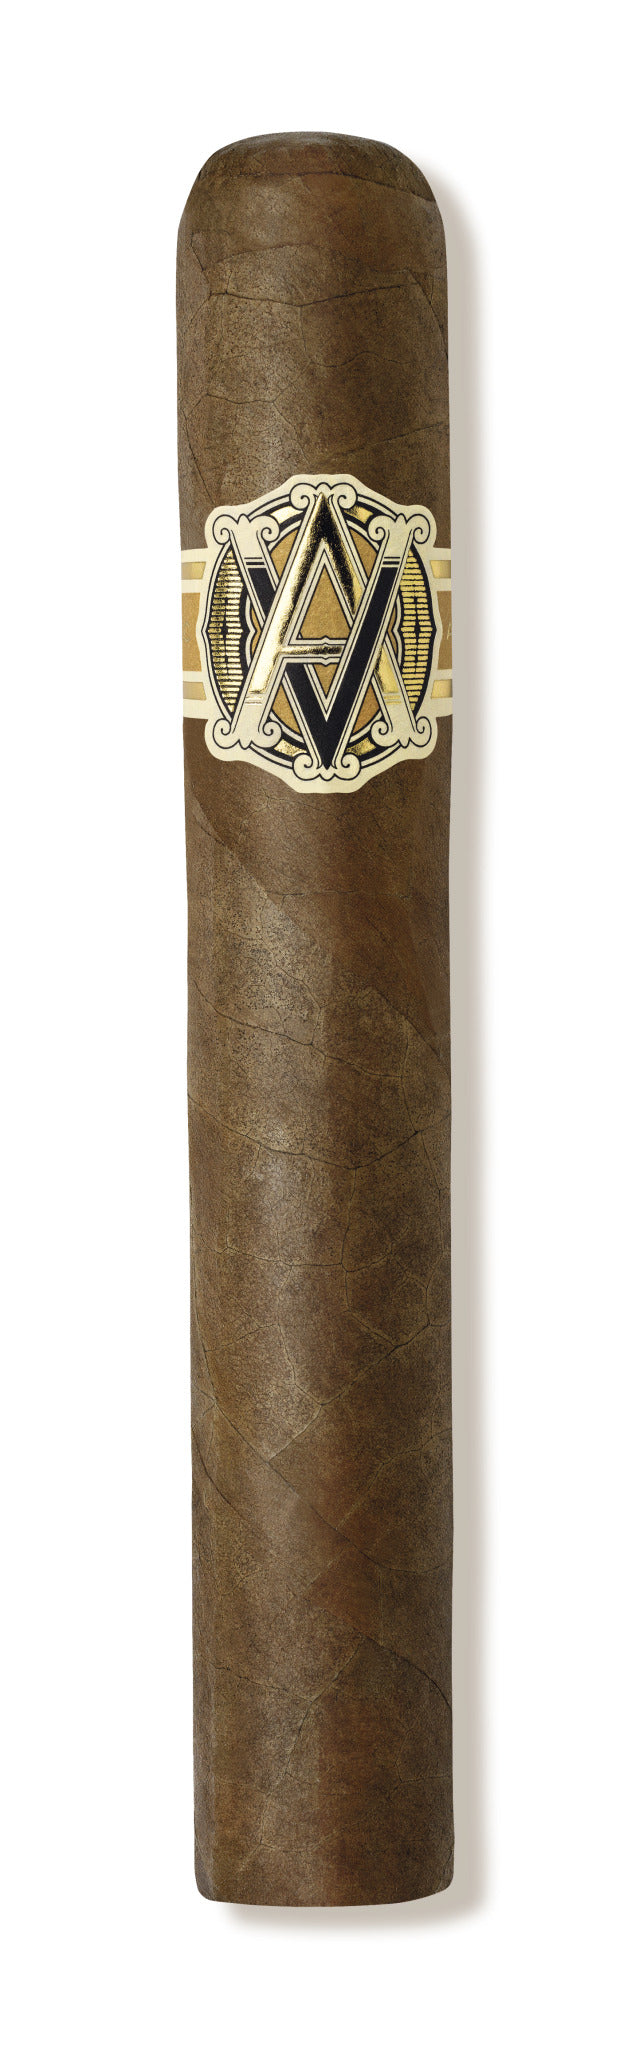 Avo Cigars Classic No.6 Featured Image